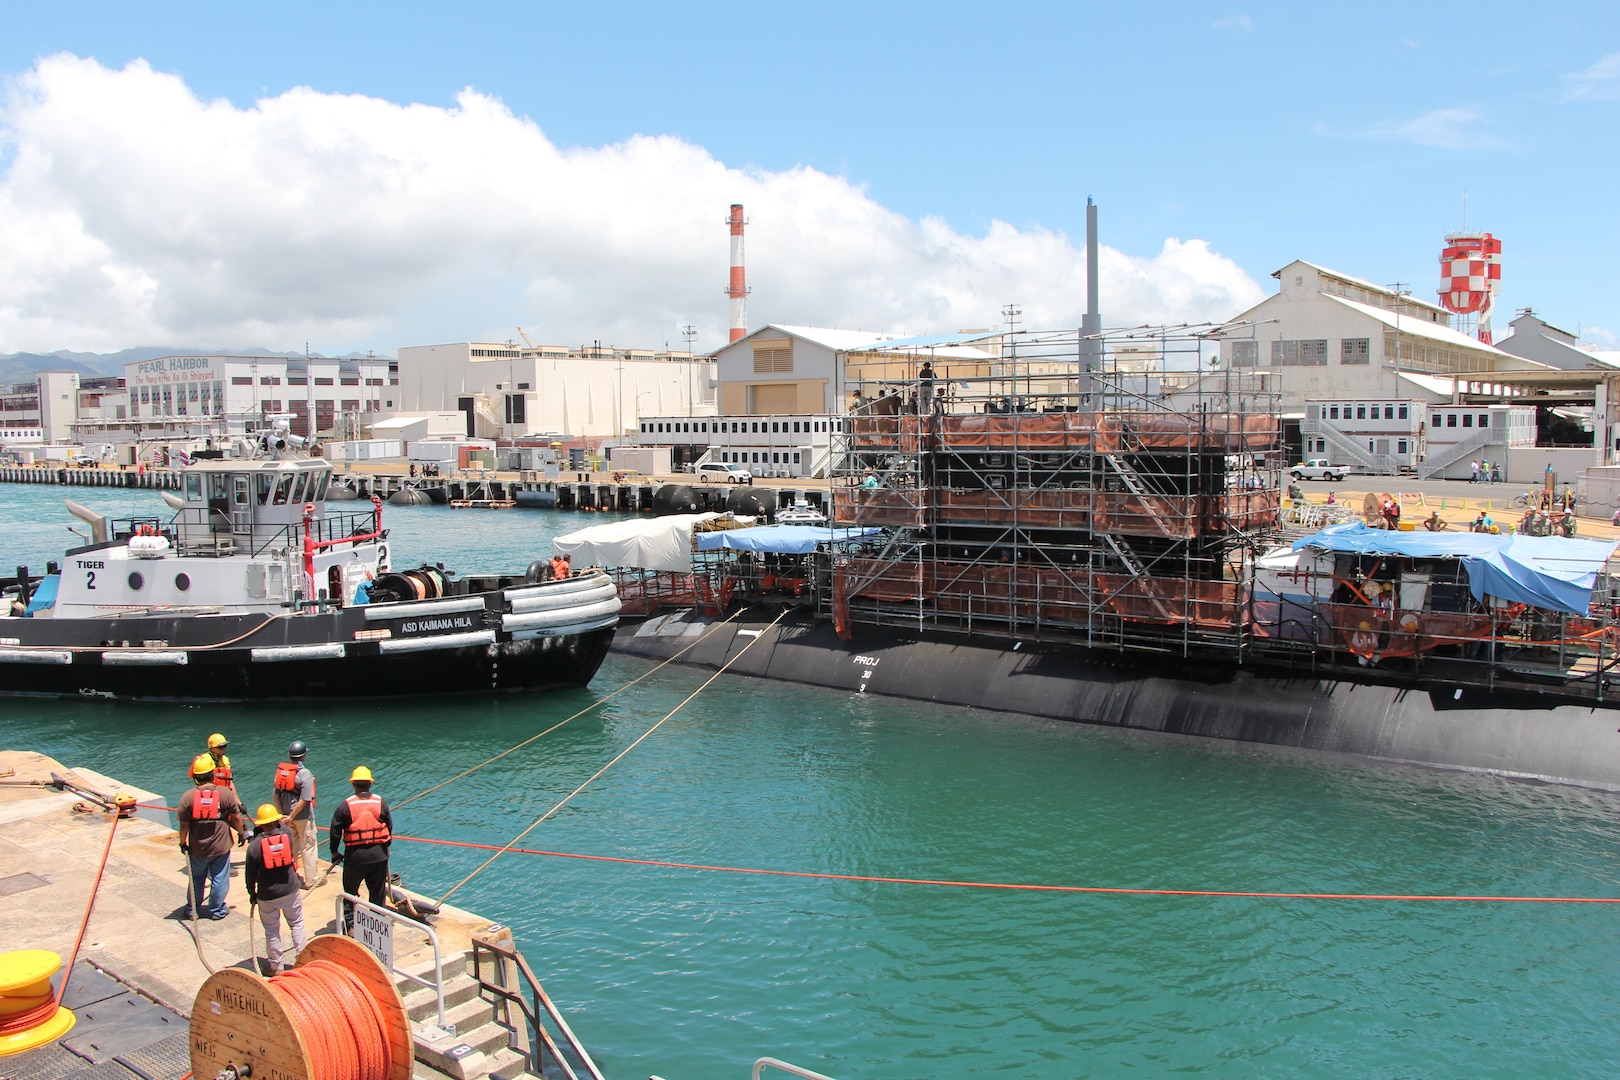 Shipyard workers carefully undock the USS Missouri (SSN-780) from Pearl Harbor Naval Shipyard & IMF’s Dry Dock One on 4 September 2019. The undocking occurred just two weeks after Dry Dock One’s celebrated centennial.